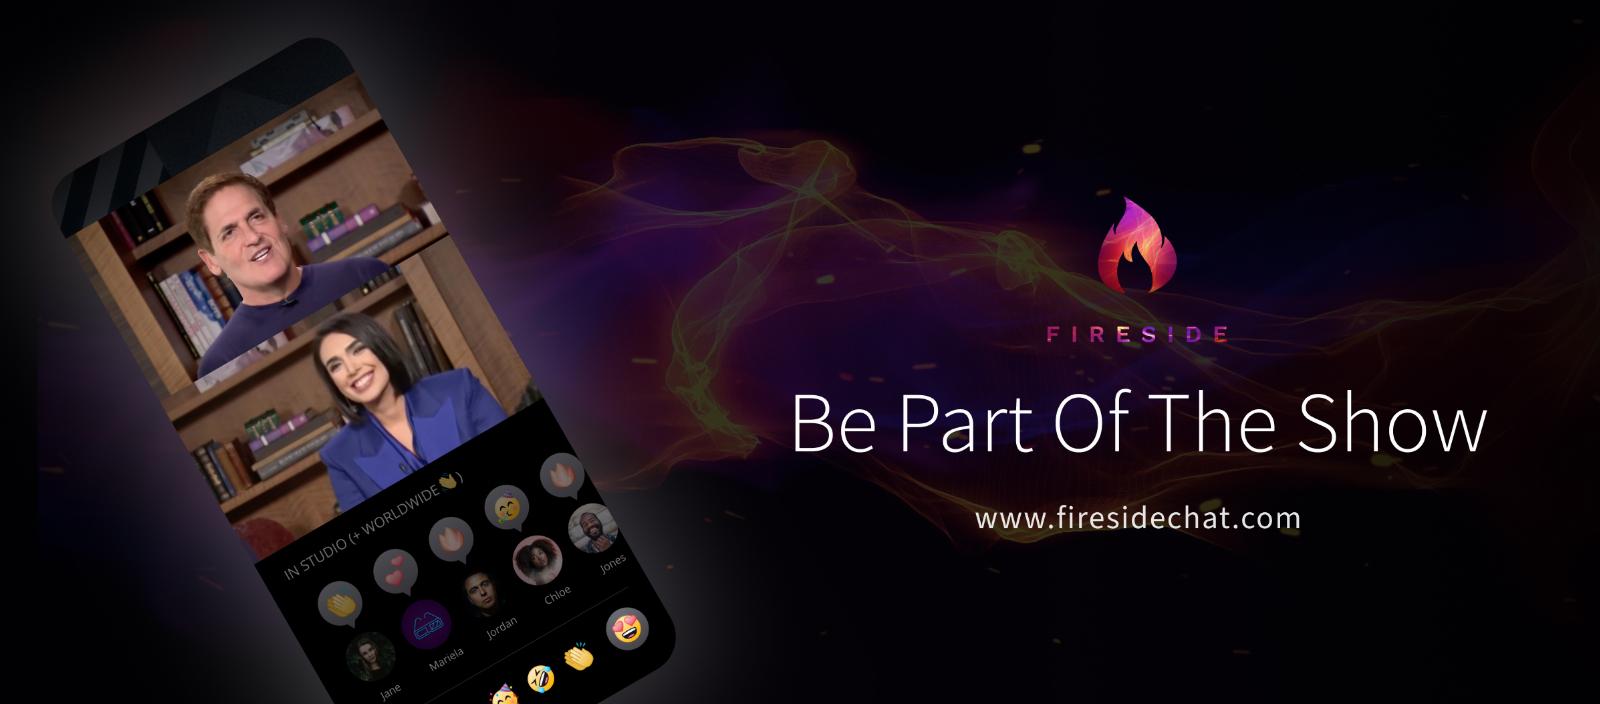 Mark Cuban-backed streaming app Fireside confirms $25M Series A at $138M valuation